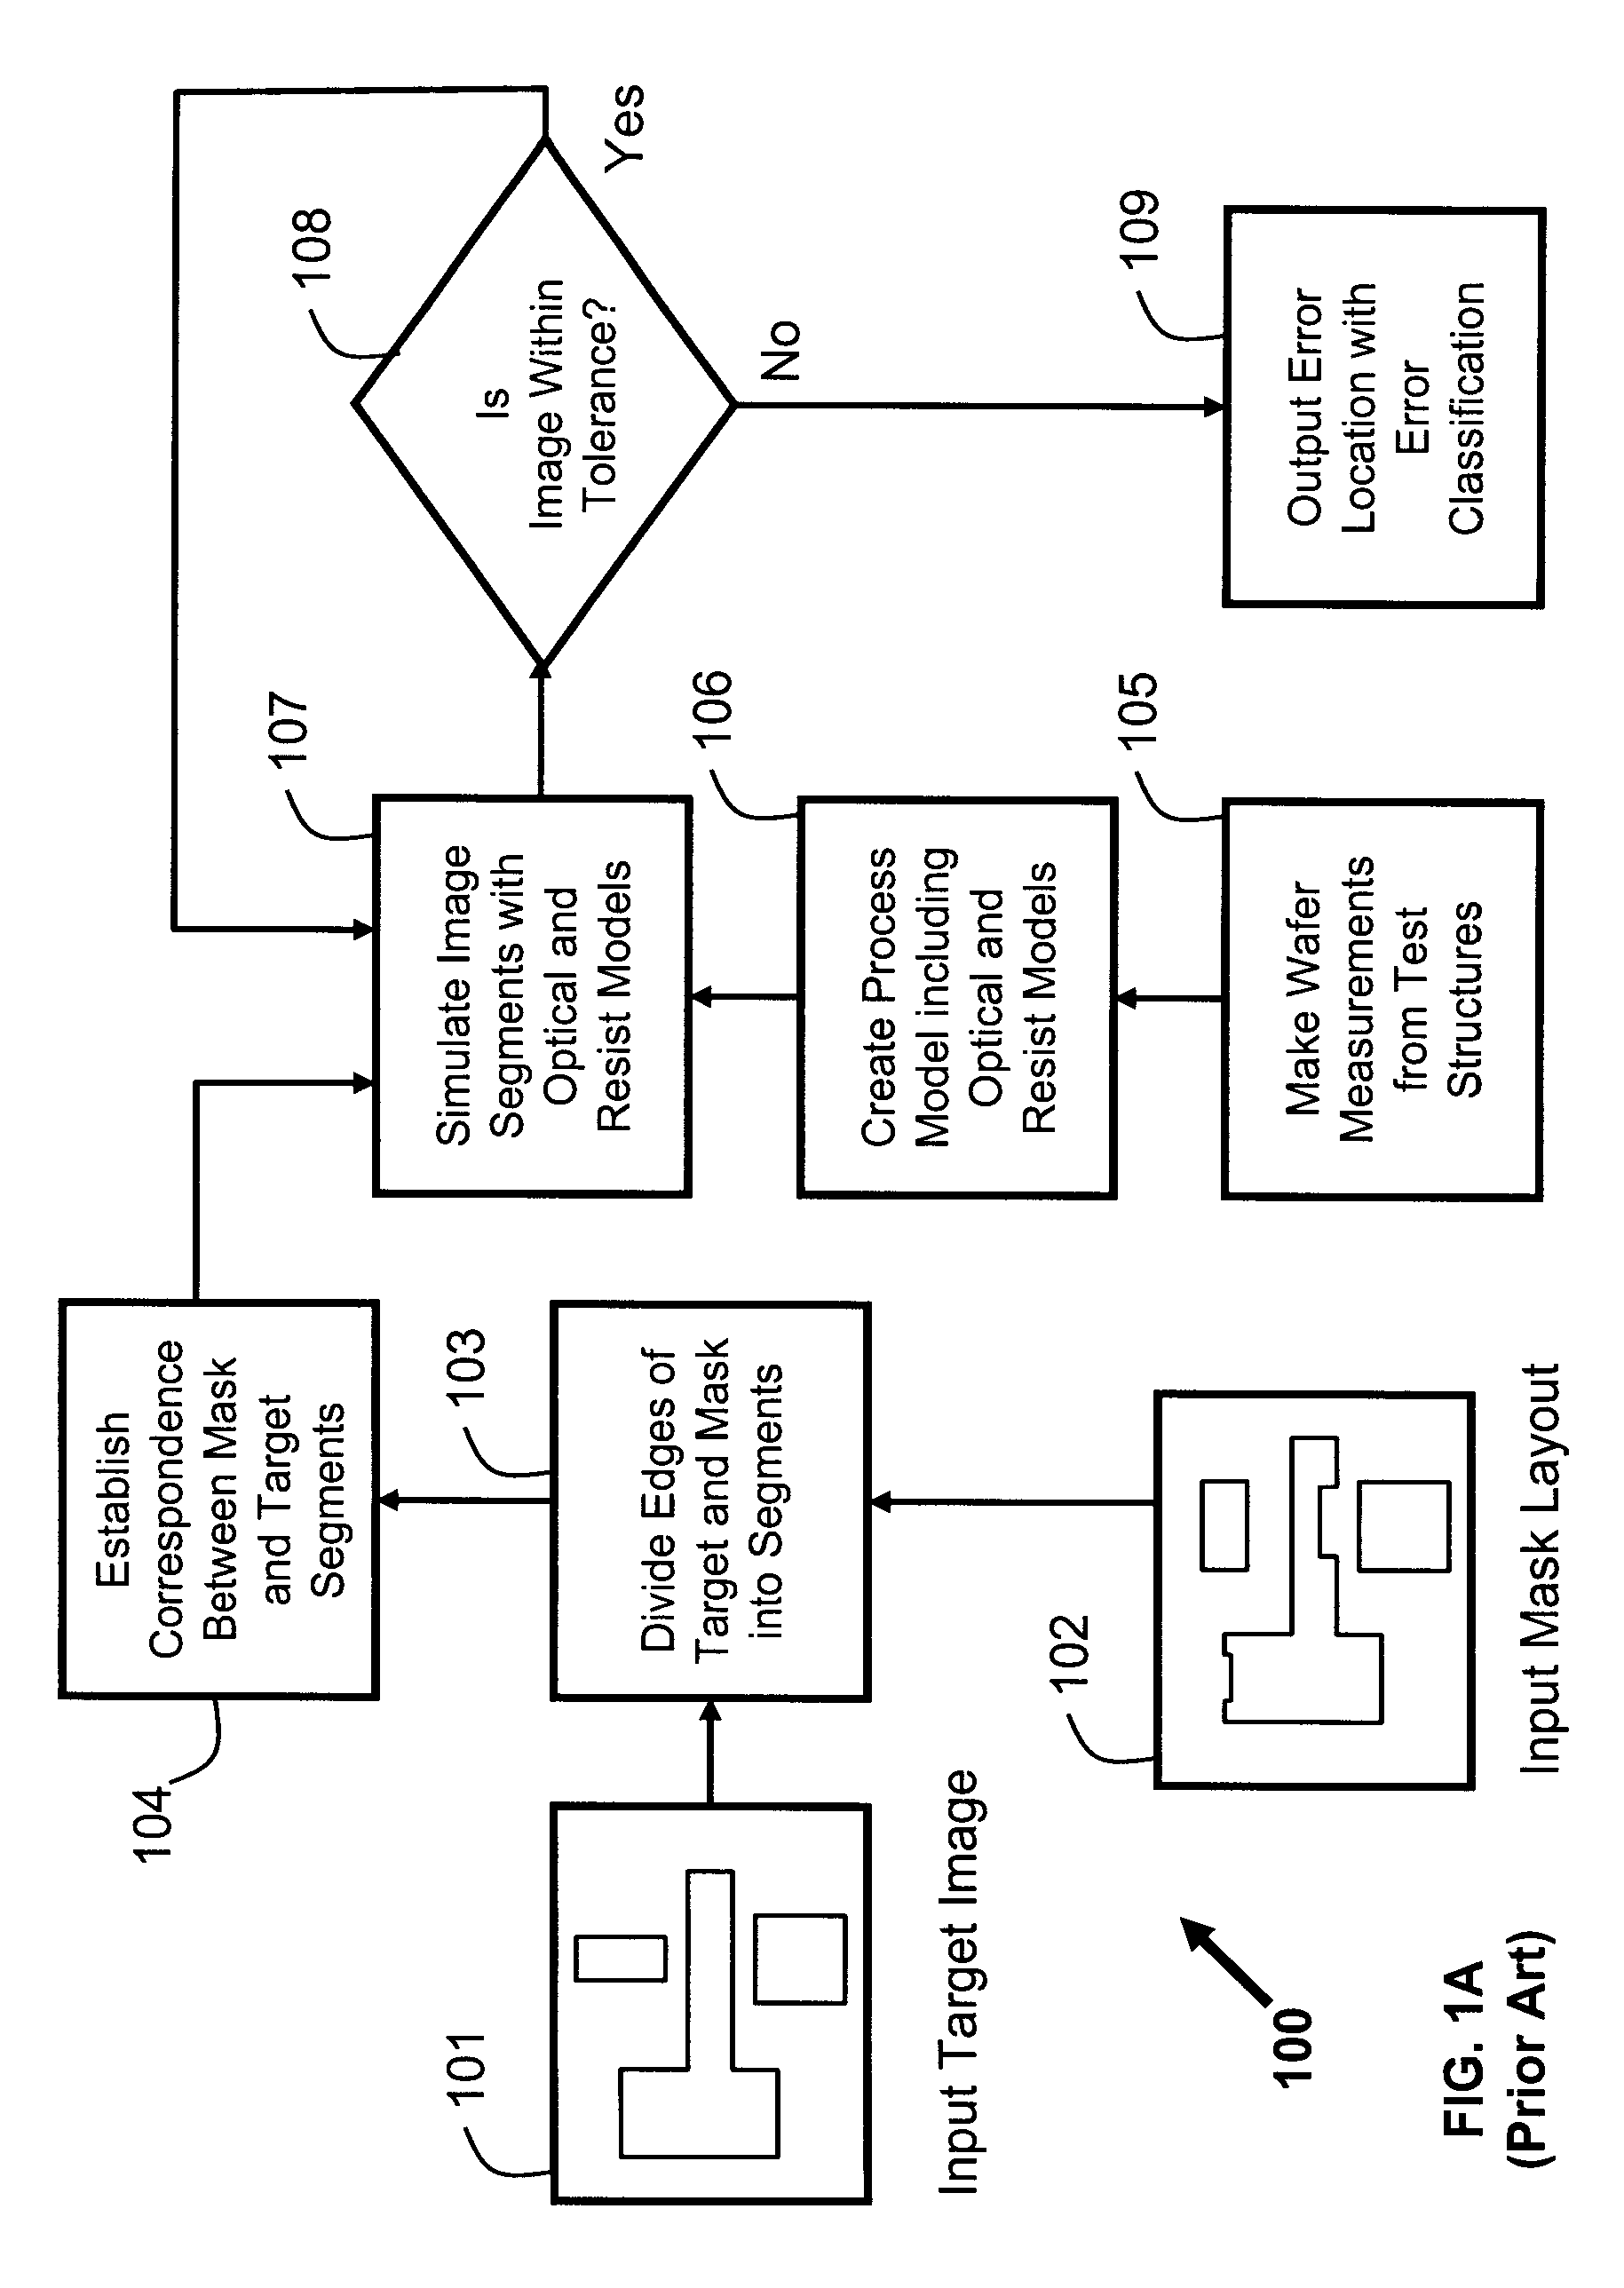 Method and system for obtaining bounds on process parameters for OPC-verification